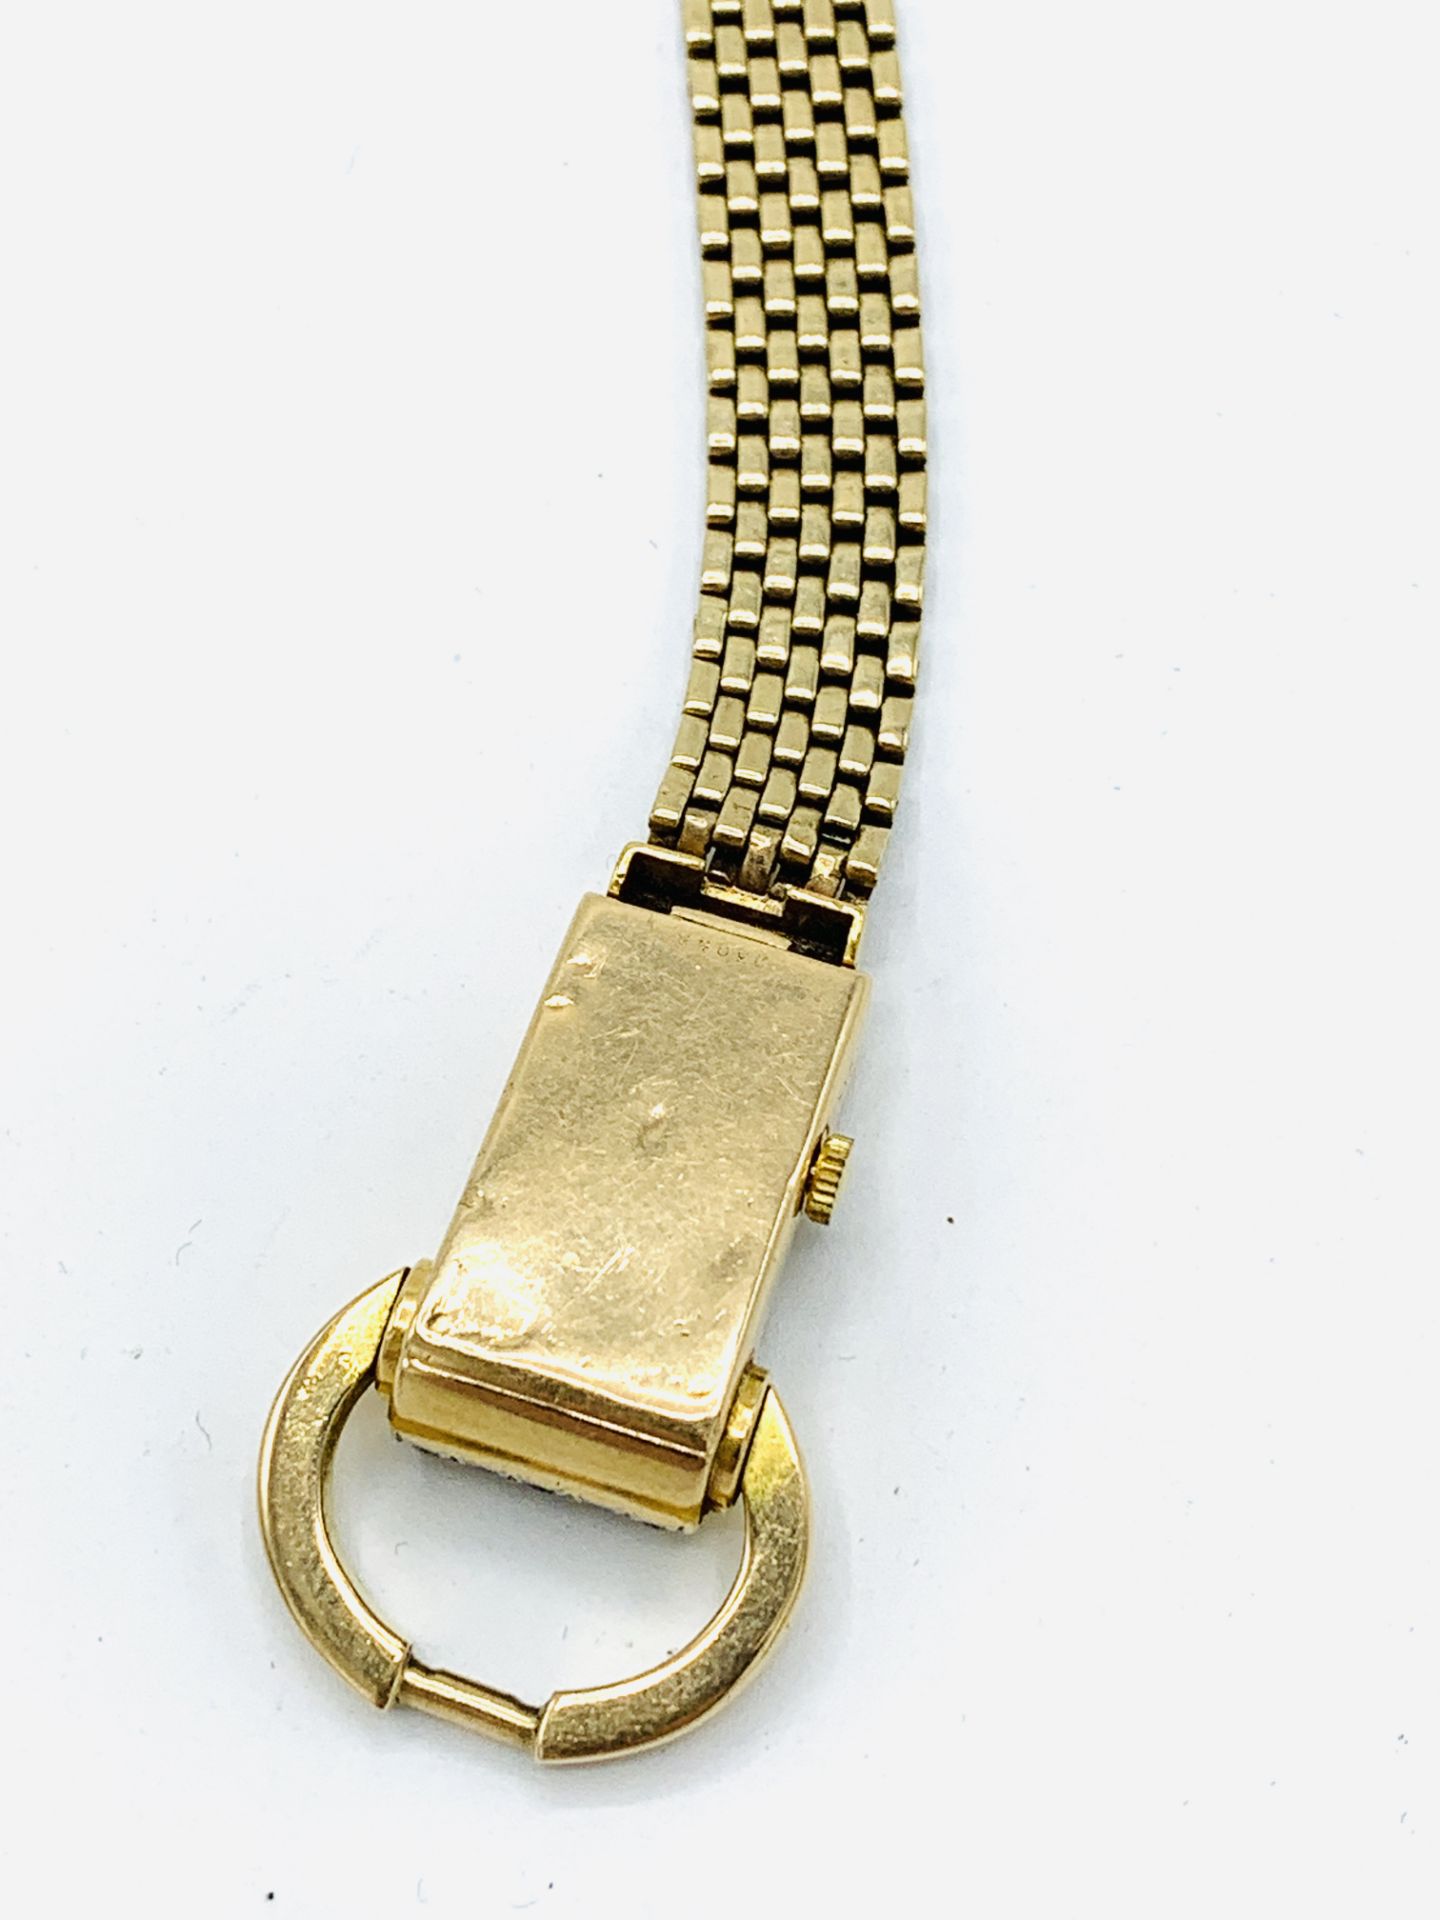 French diamond mounted cocktail watch with hallmarked 18ct gold case and strap - Image 3 of 6